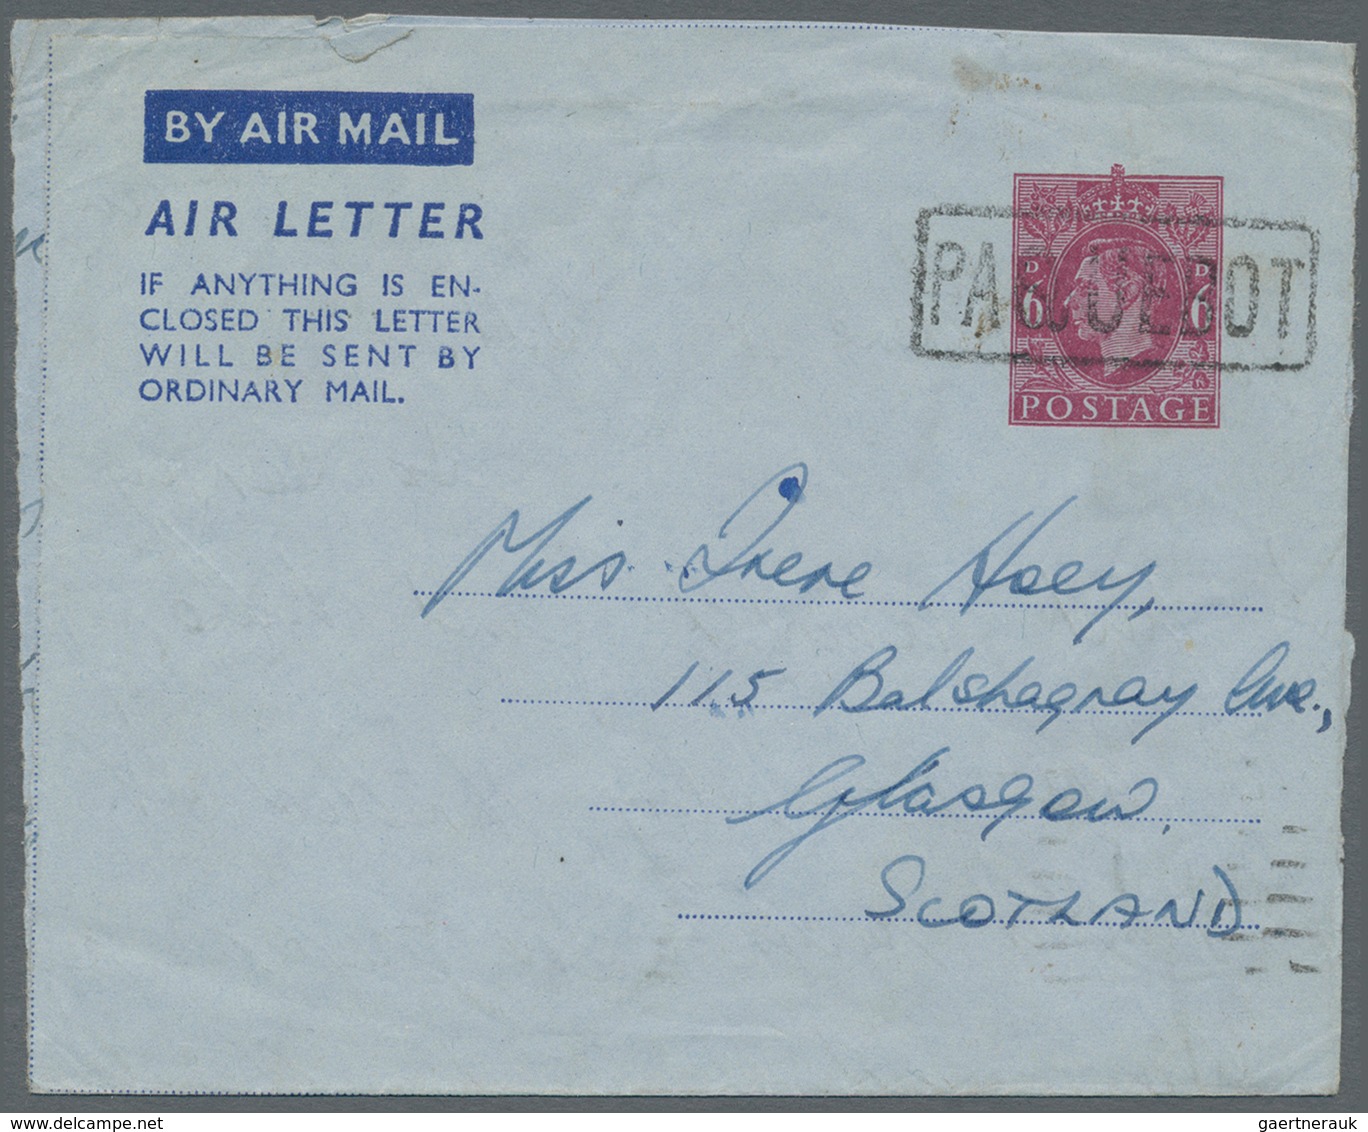 Schiffspost Alle Welt: 1949/1985 (ca.), accumulation with about 100 mostly airletters and aerogramme